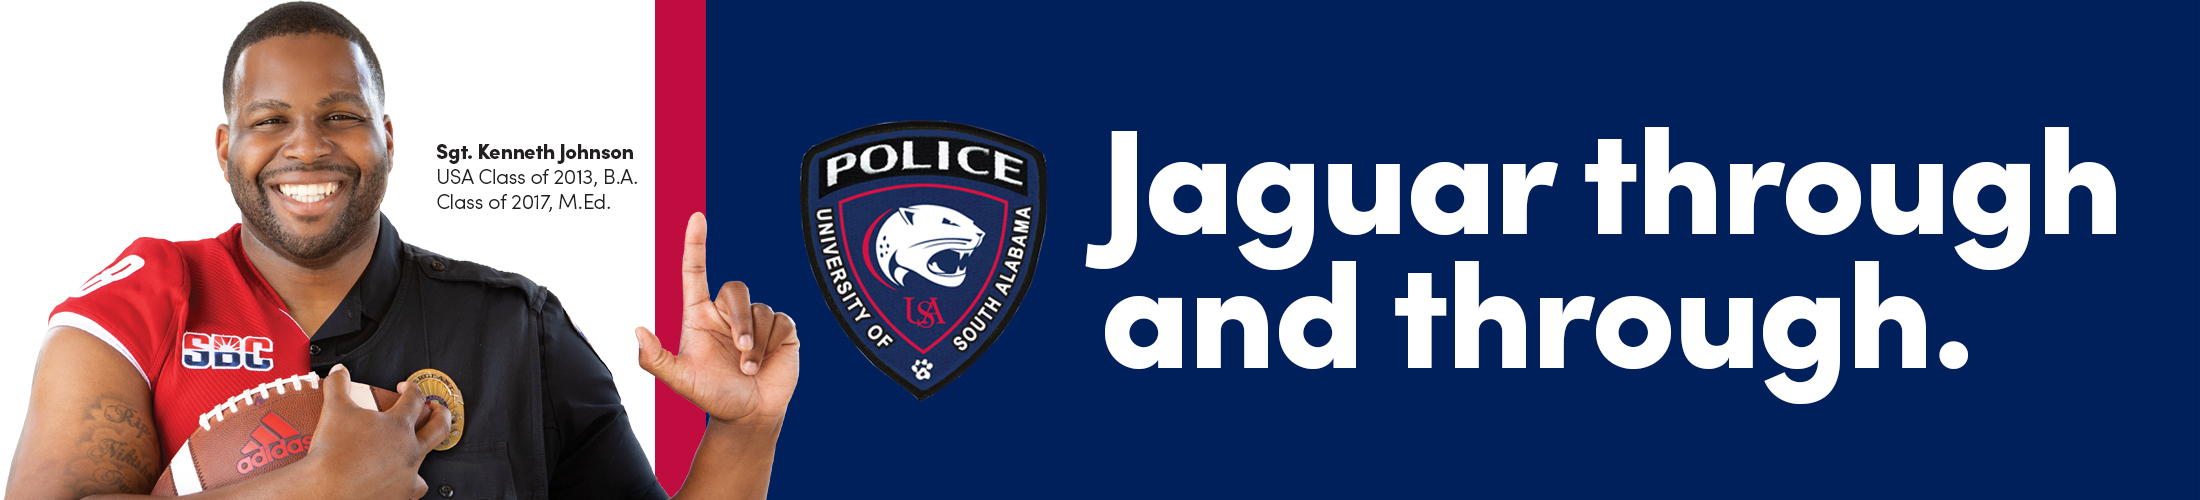 Officer Johnson with text Jaguar Through and through